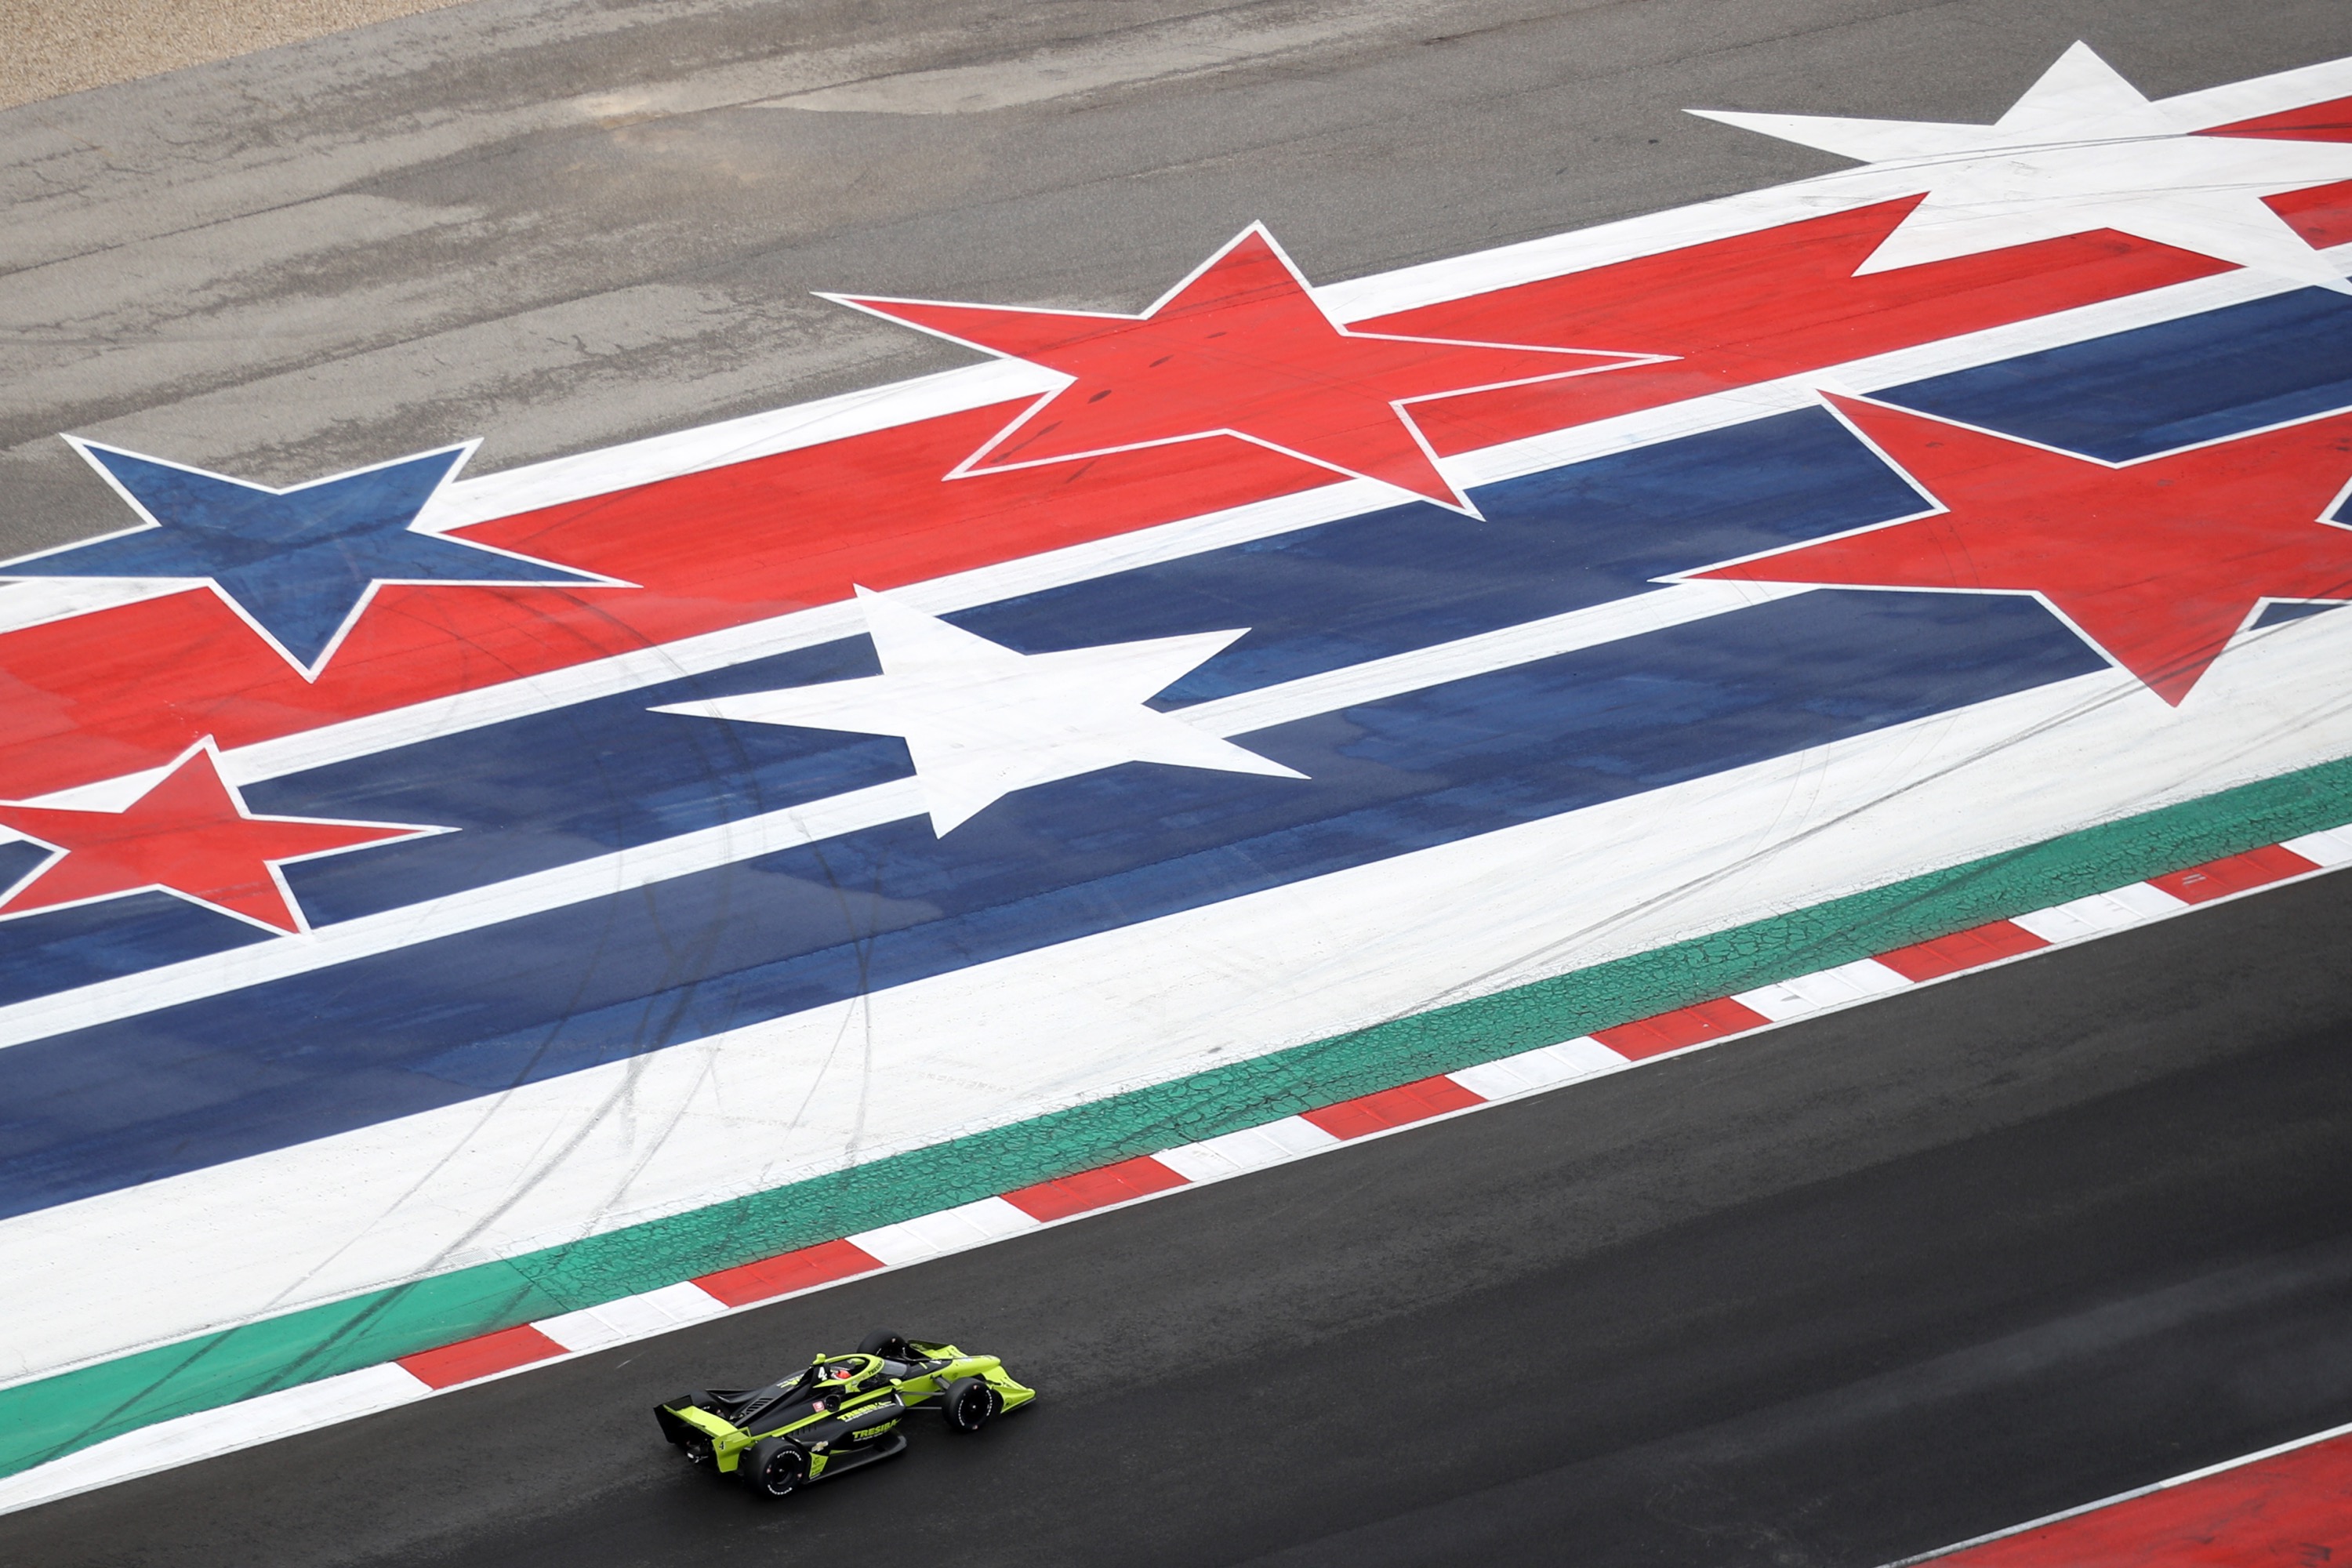 Kimball during testing at Circuit of The Americas on February 12, 2020. I mainly included this picture because today is July 4 and there are huge stars and stripes in it. 